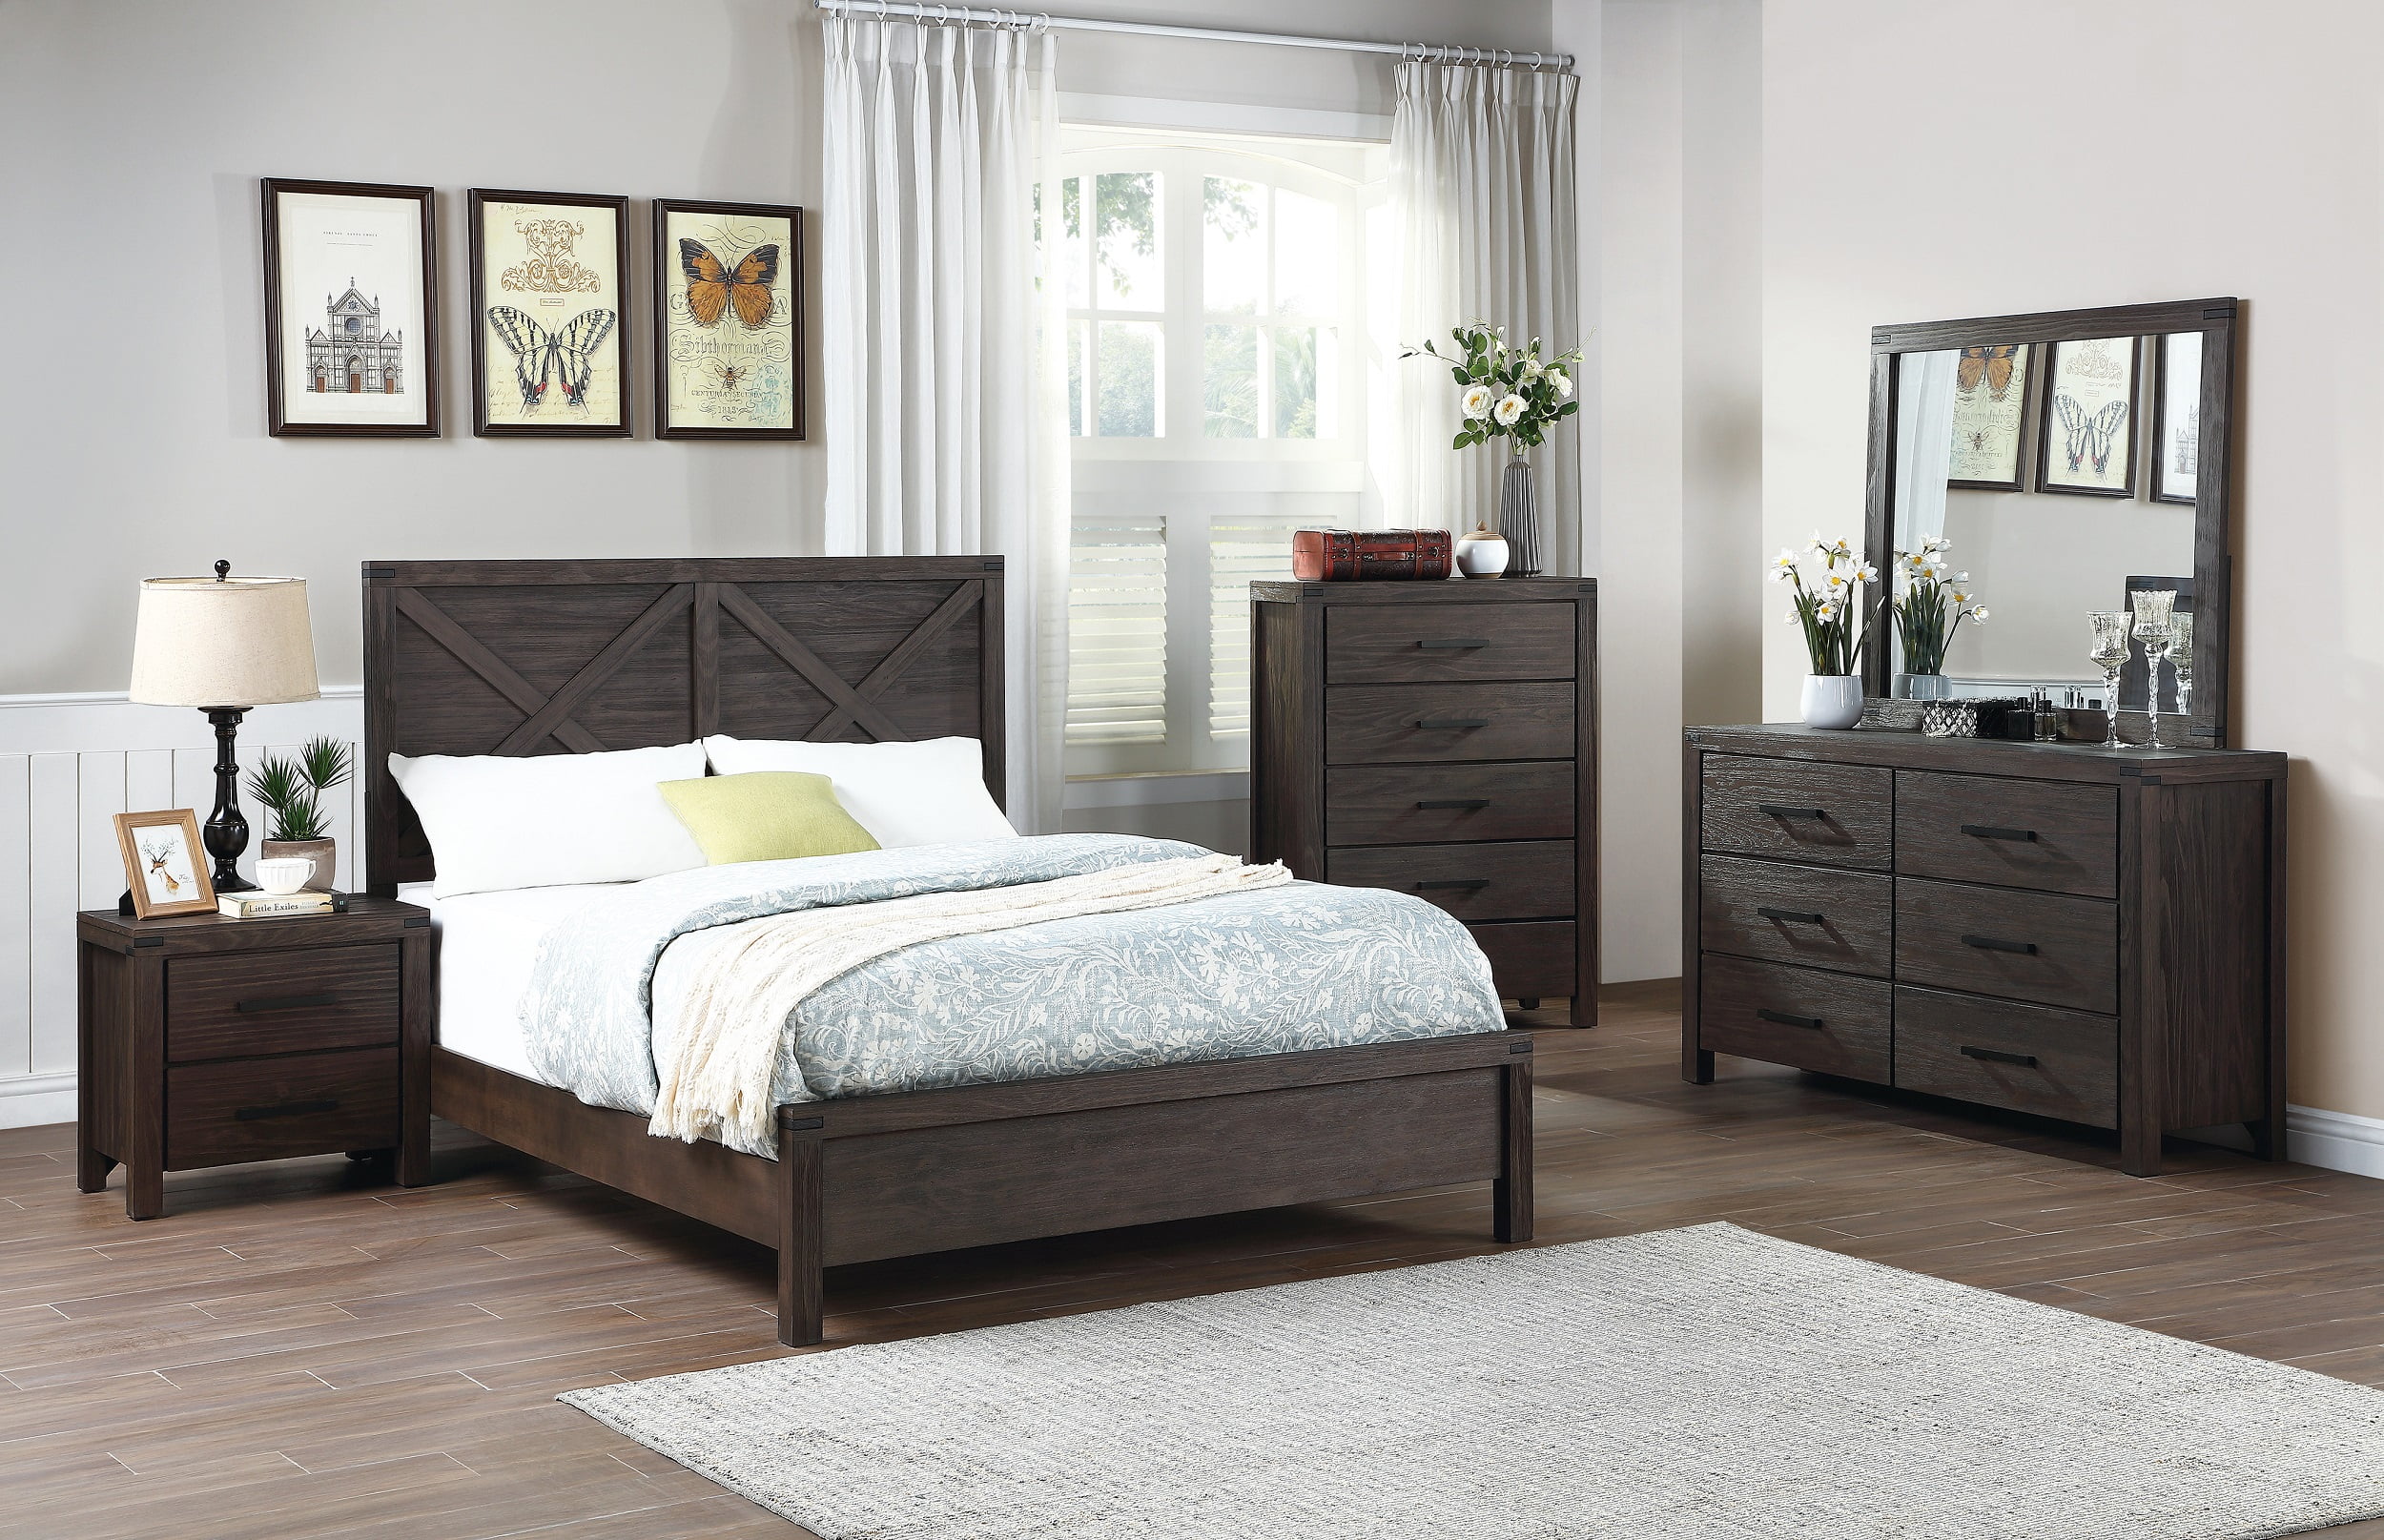 4pc Bedroom Furniture Modern Contemporary Solid wood Eastern king Size Bed Dresser Mirror